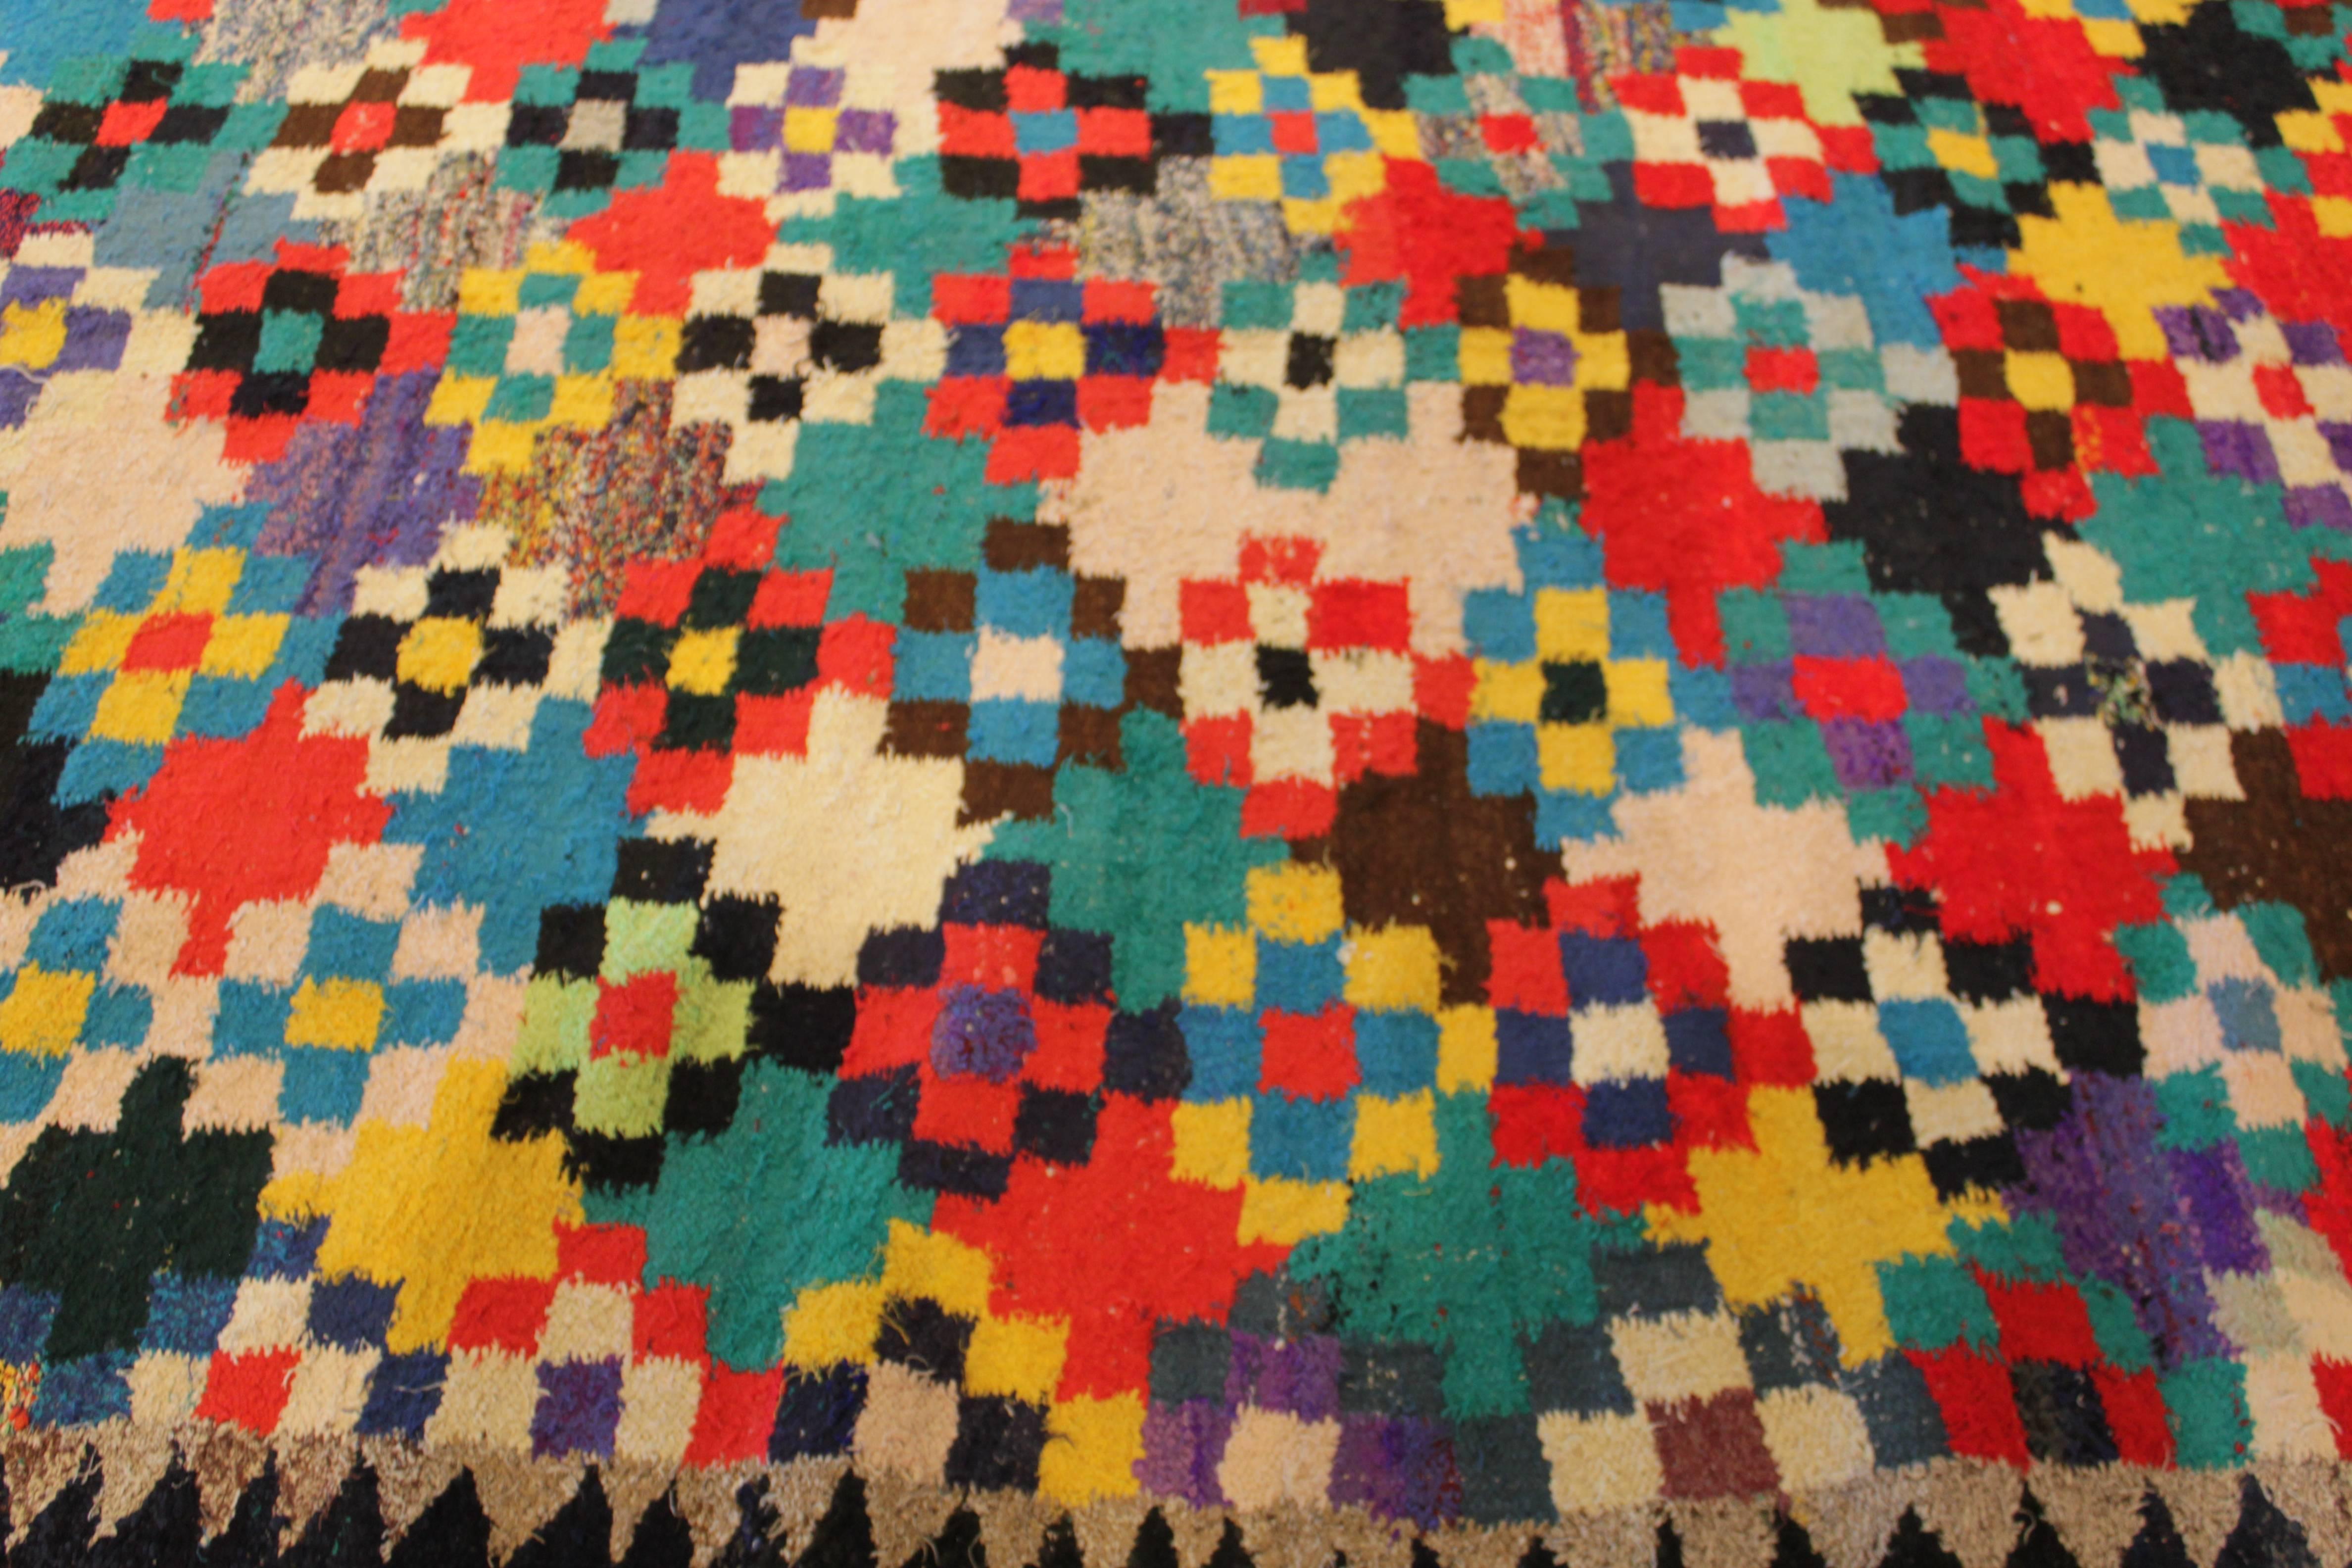 Beautifully Designed Vintage Kilim Rug In Excellent Condition For Sale In Norwalk, CT